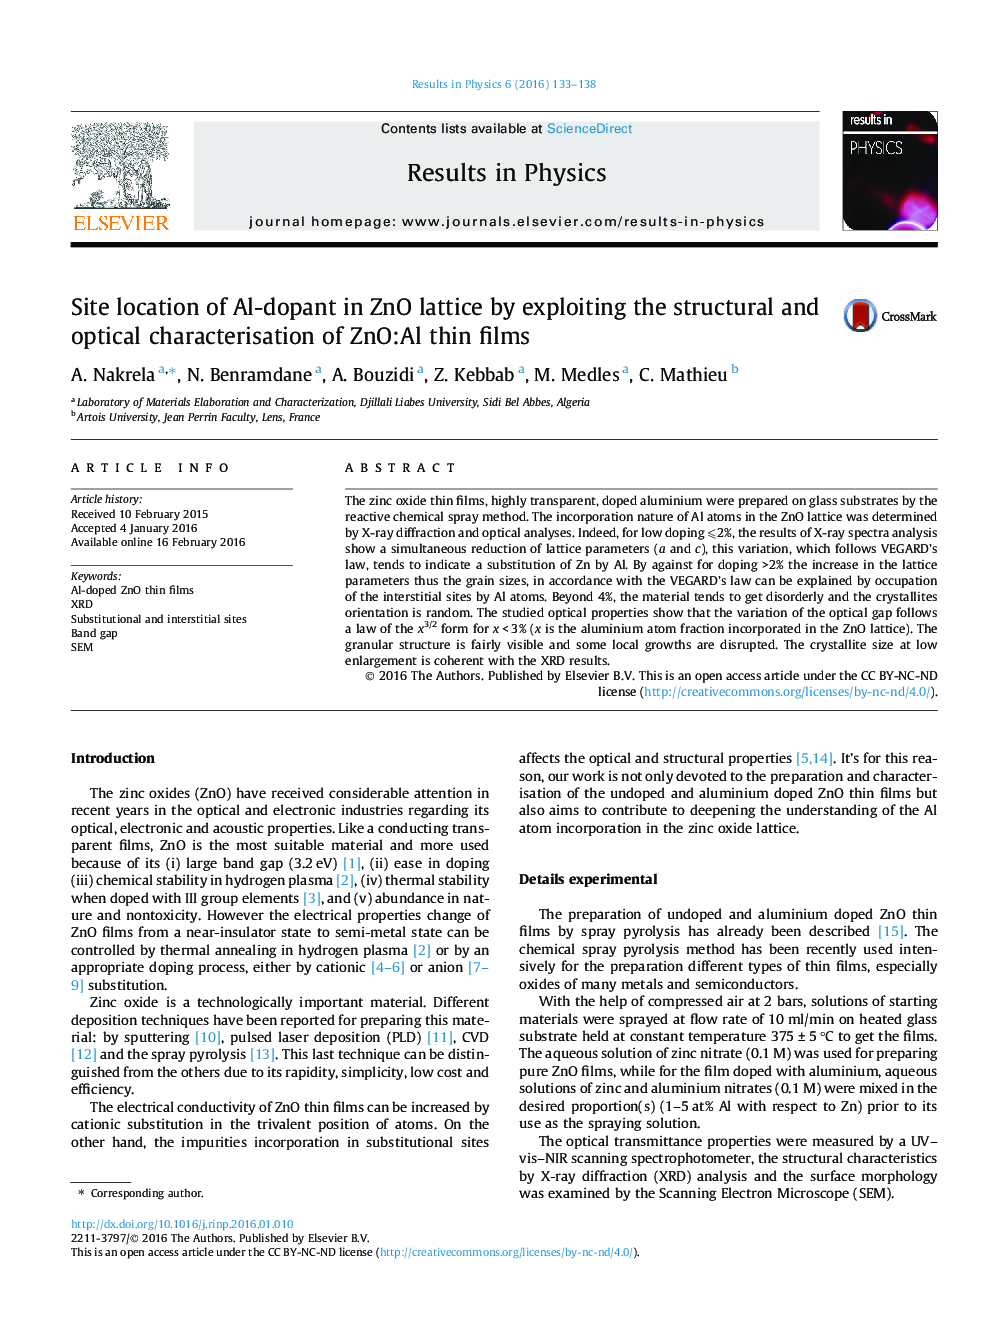 Site location of Al-dopant in ZnO lattice by exploiting the structural and optical characterisation of ZnO:Al thin films